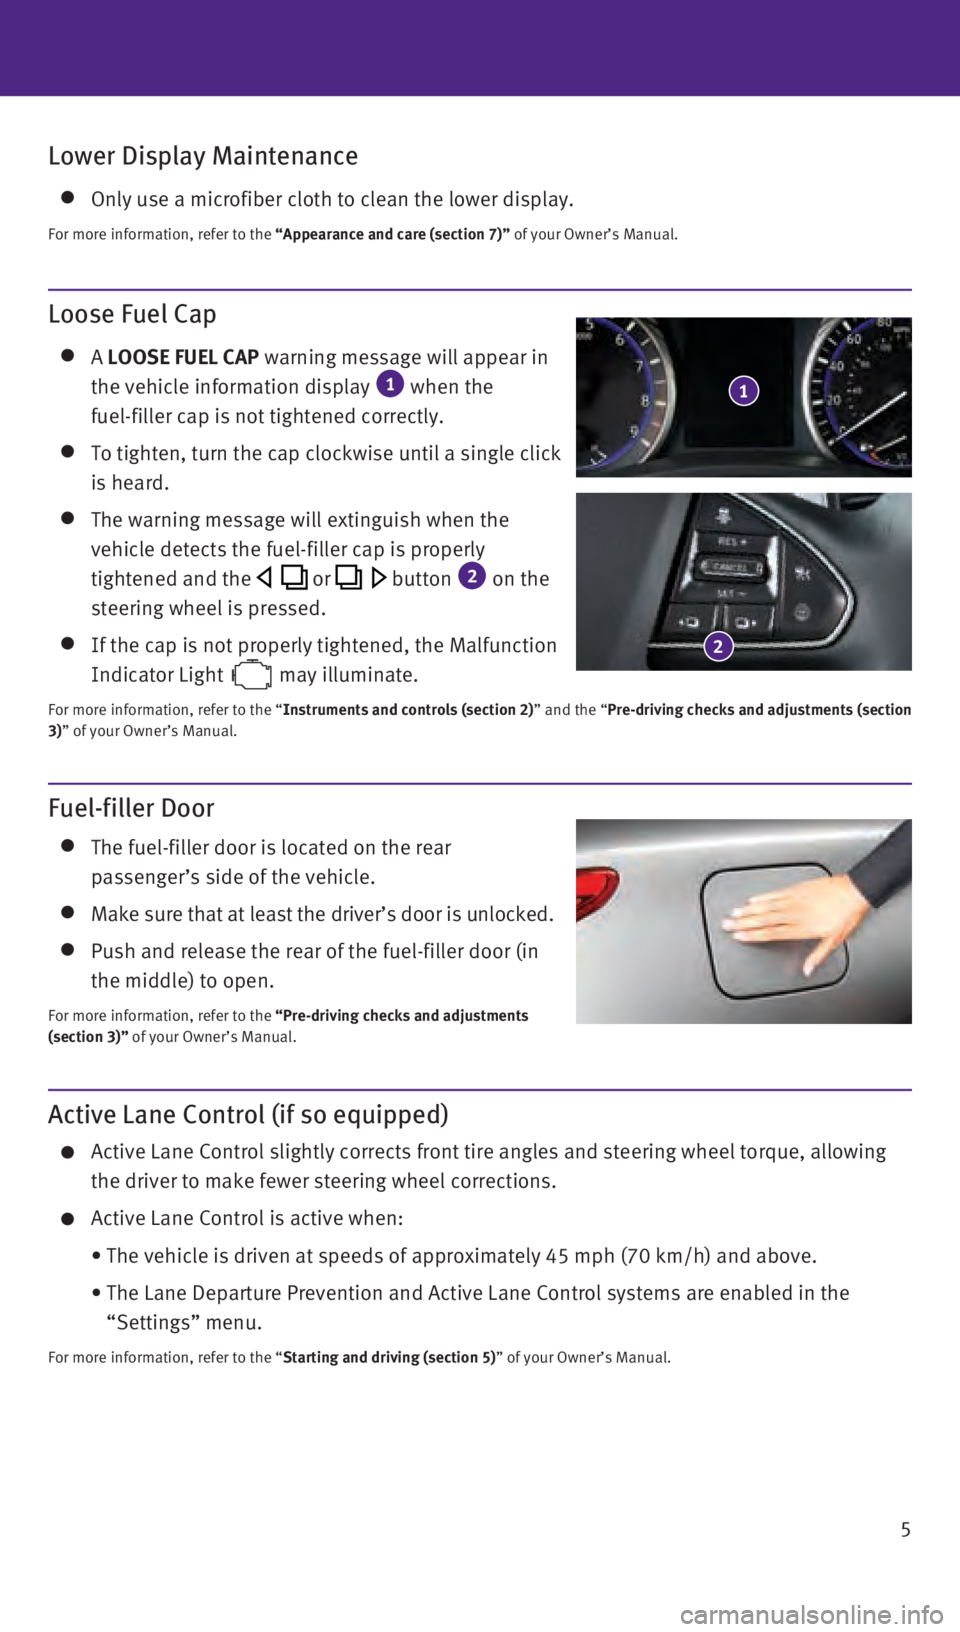 INFINITI Q50 2016  Quick Reference Guide 5
Lower Display Maintenance
  Only use a microfiber cloth to clean the lower display.
For more information, refer to the “Appearance and care (section 7)” of your Owner’s Manual.
Fuel-filler Doo